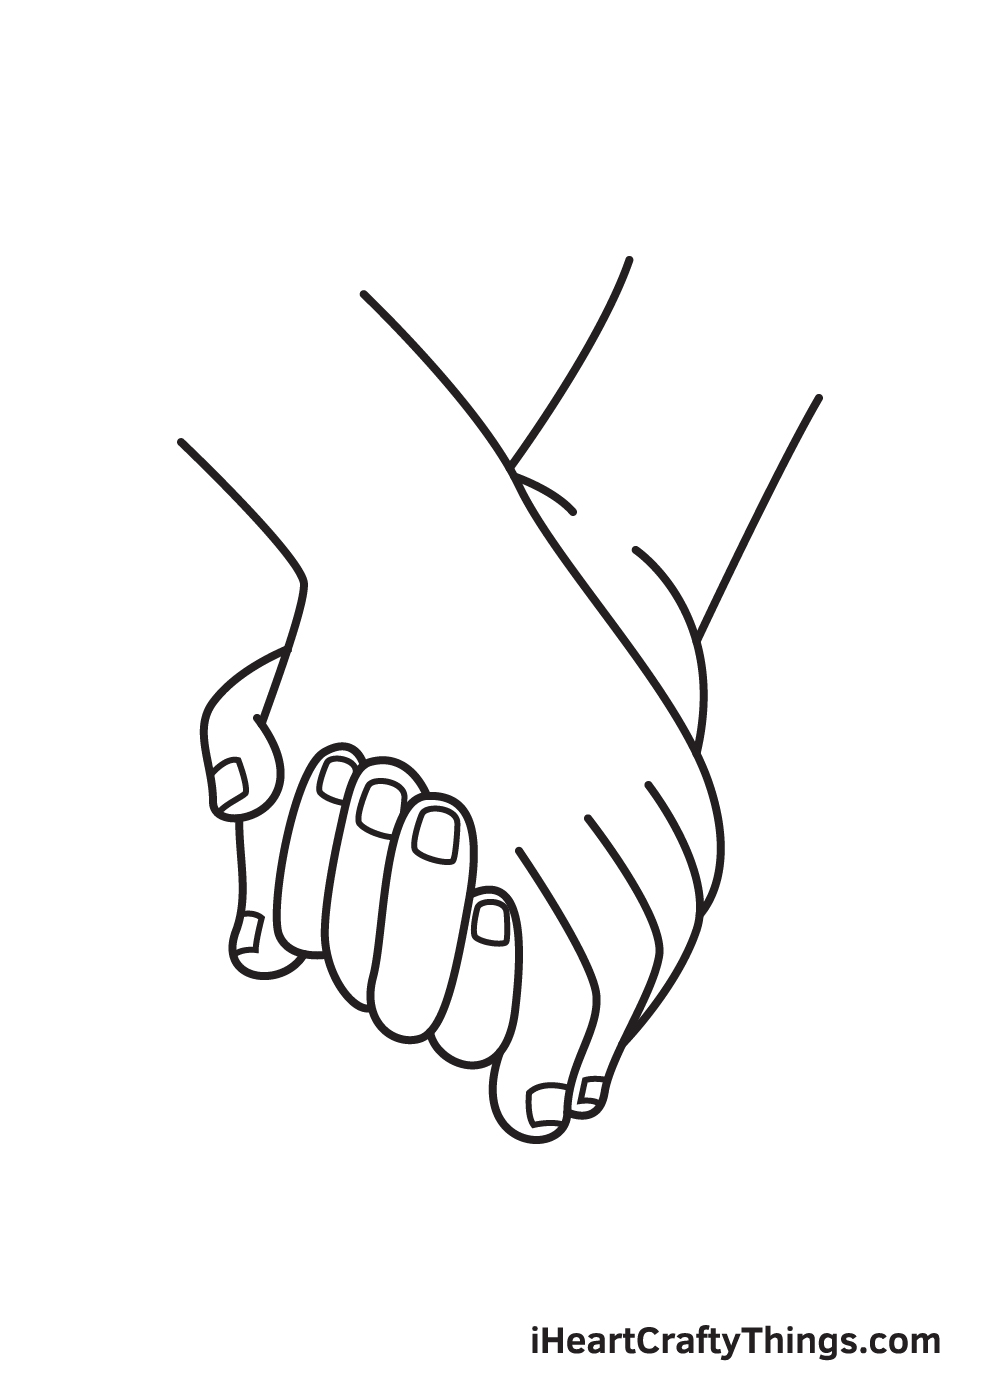 Of hand holding